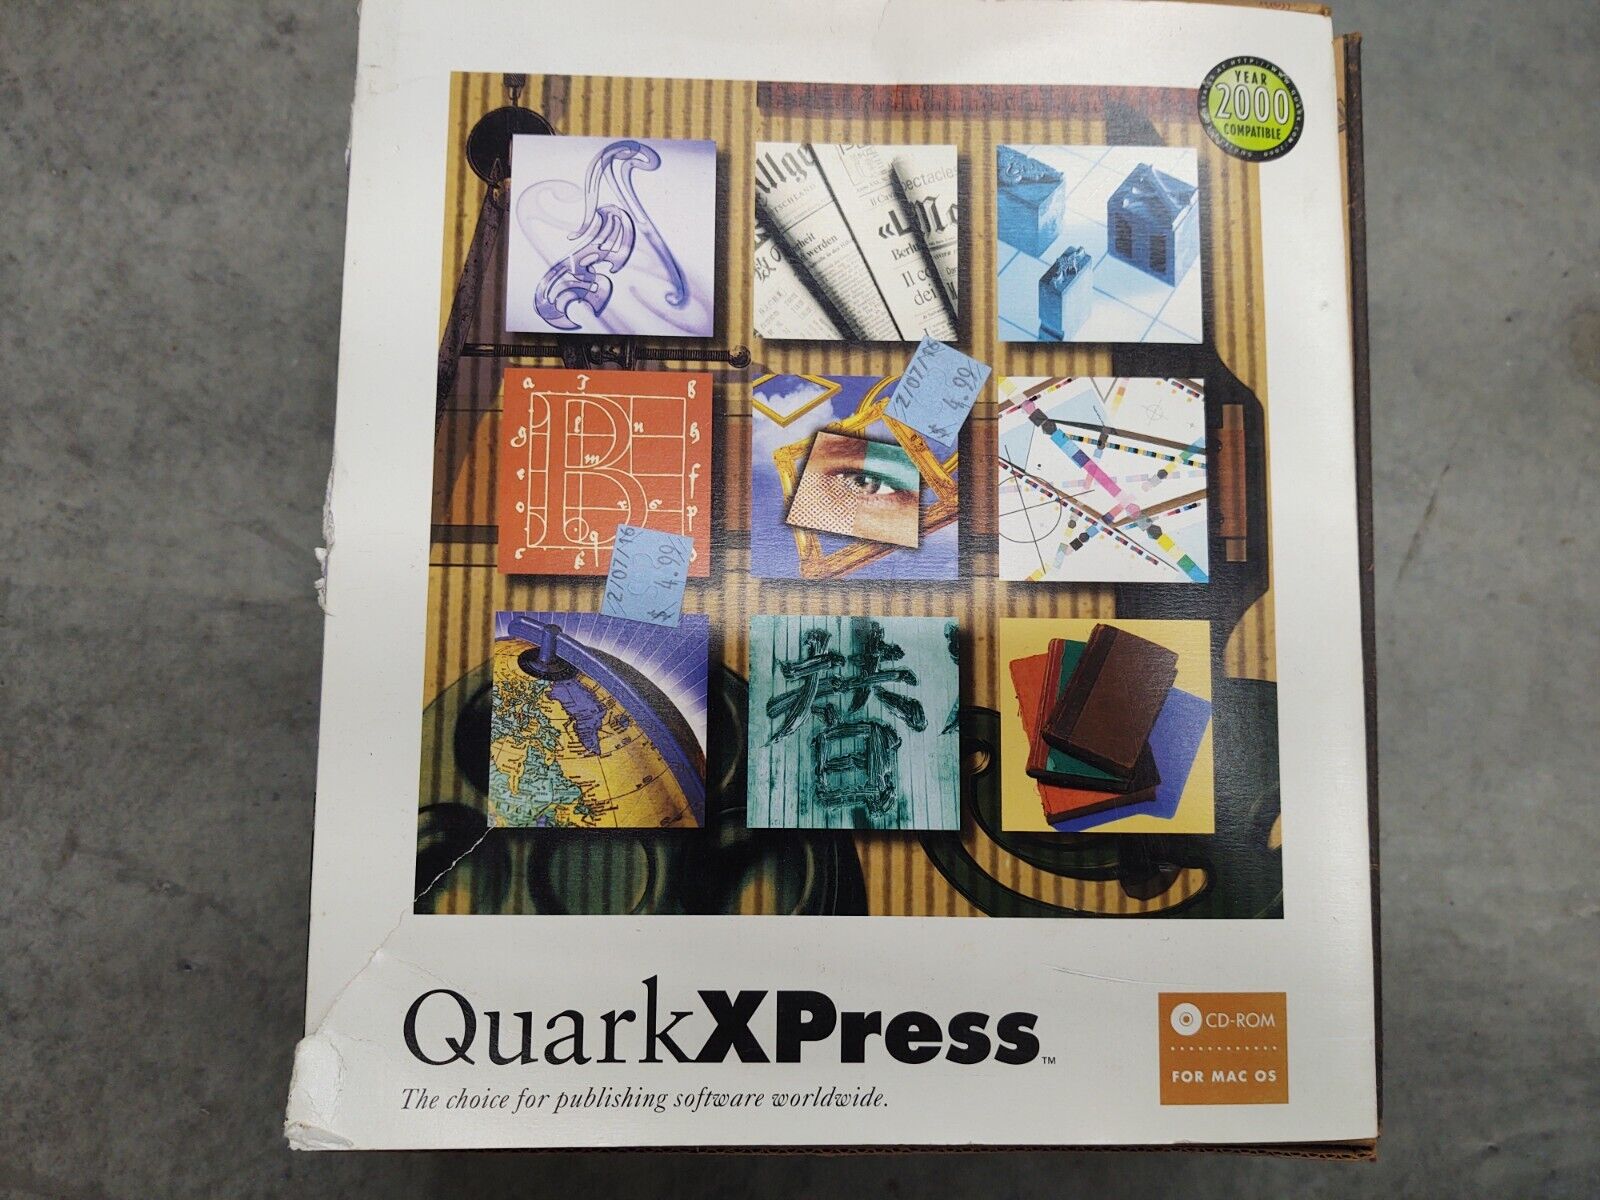 Quark XPress 4.1 CD-Rom for Windows with 3.5” Disks and Mac Install -SEALED (A1)